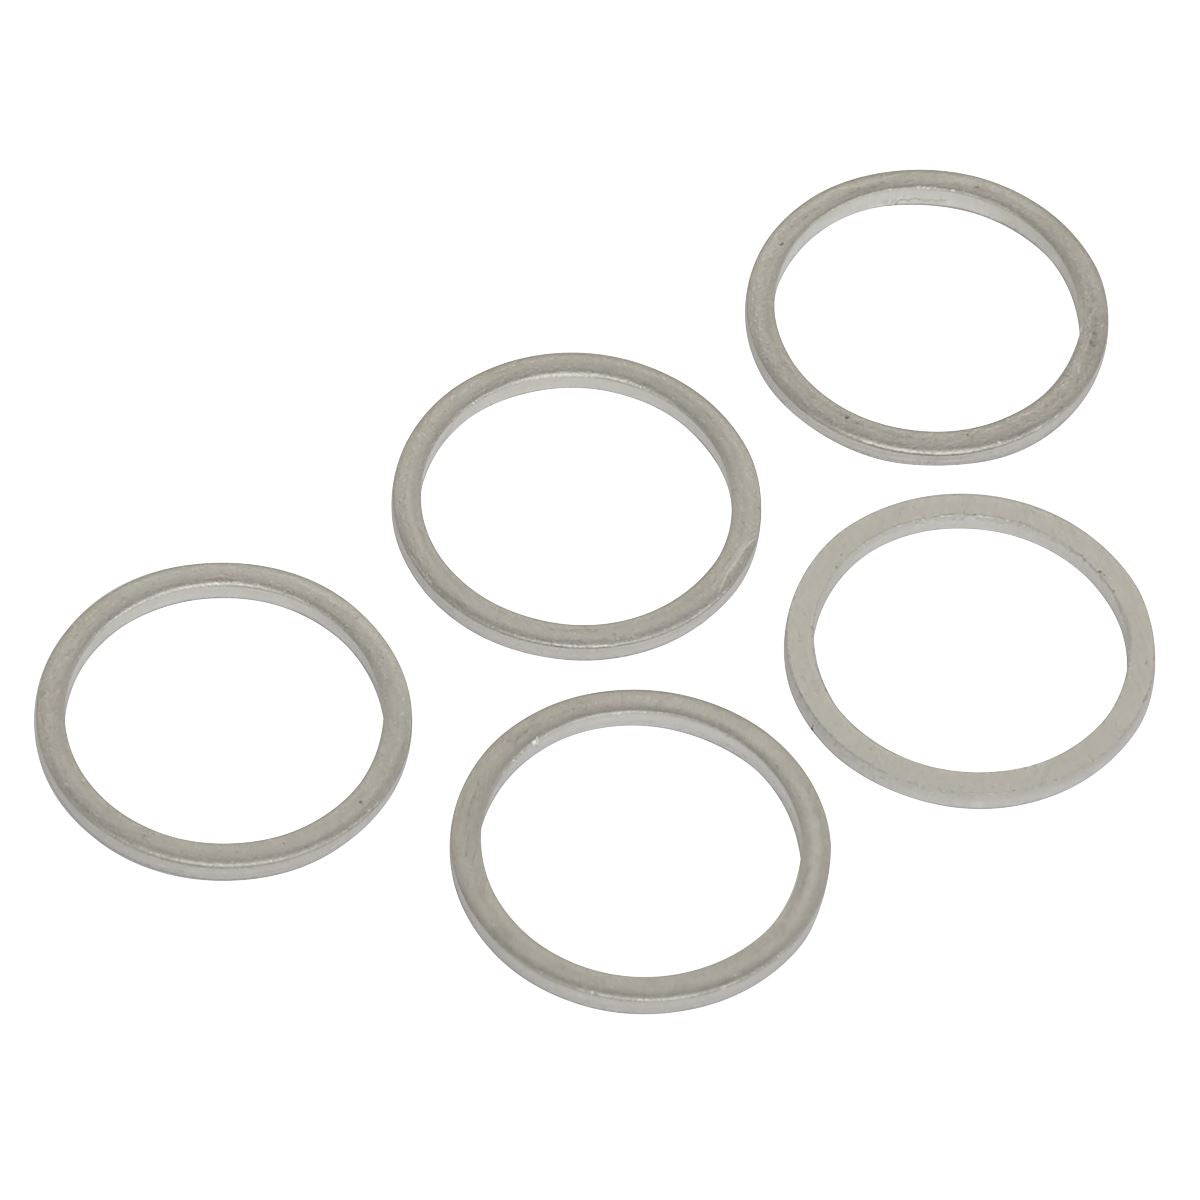 Sealey Sump Plug Washer M17 - Pack of 5